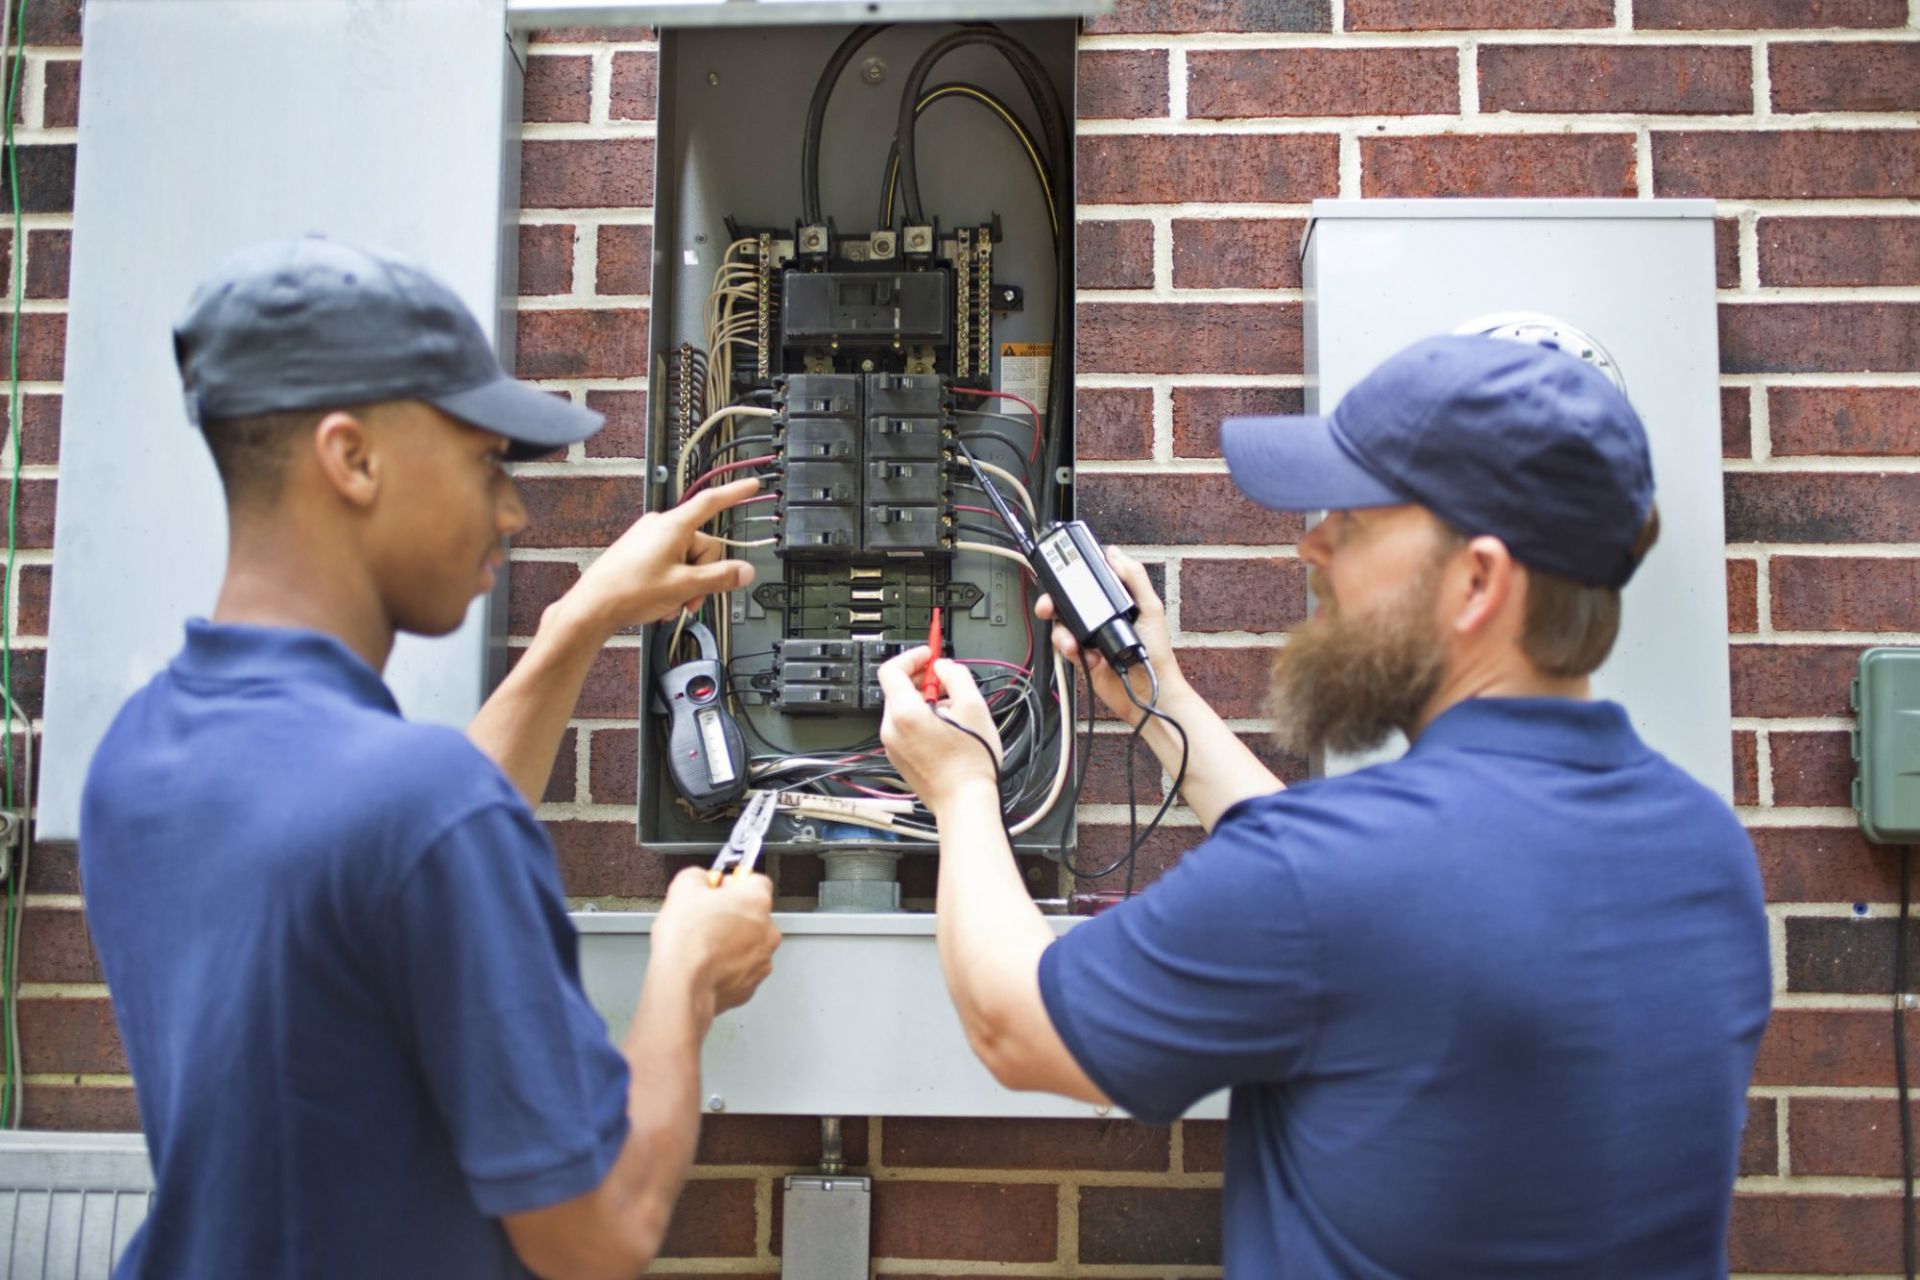 Electrical Contractors in MA and CT